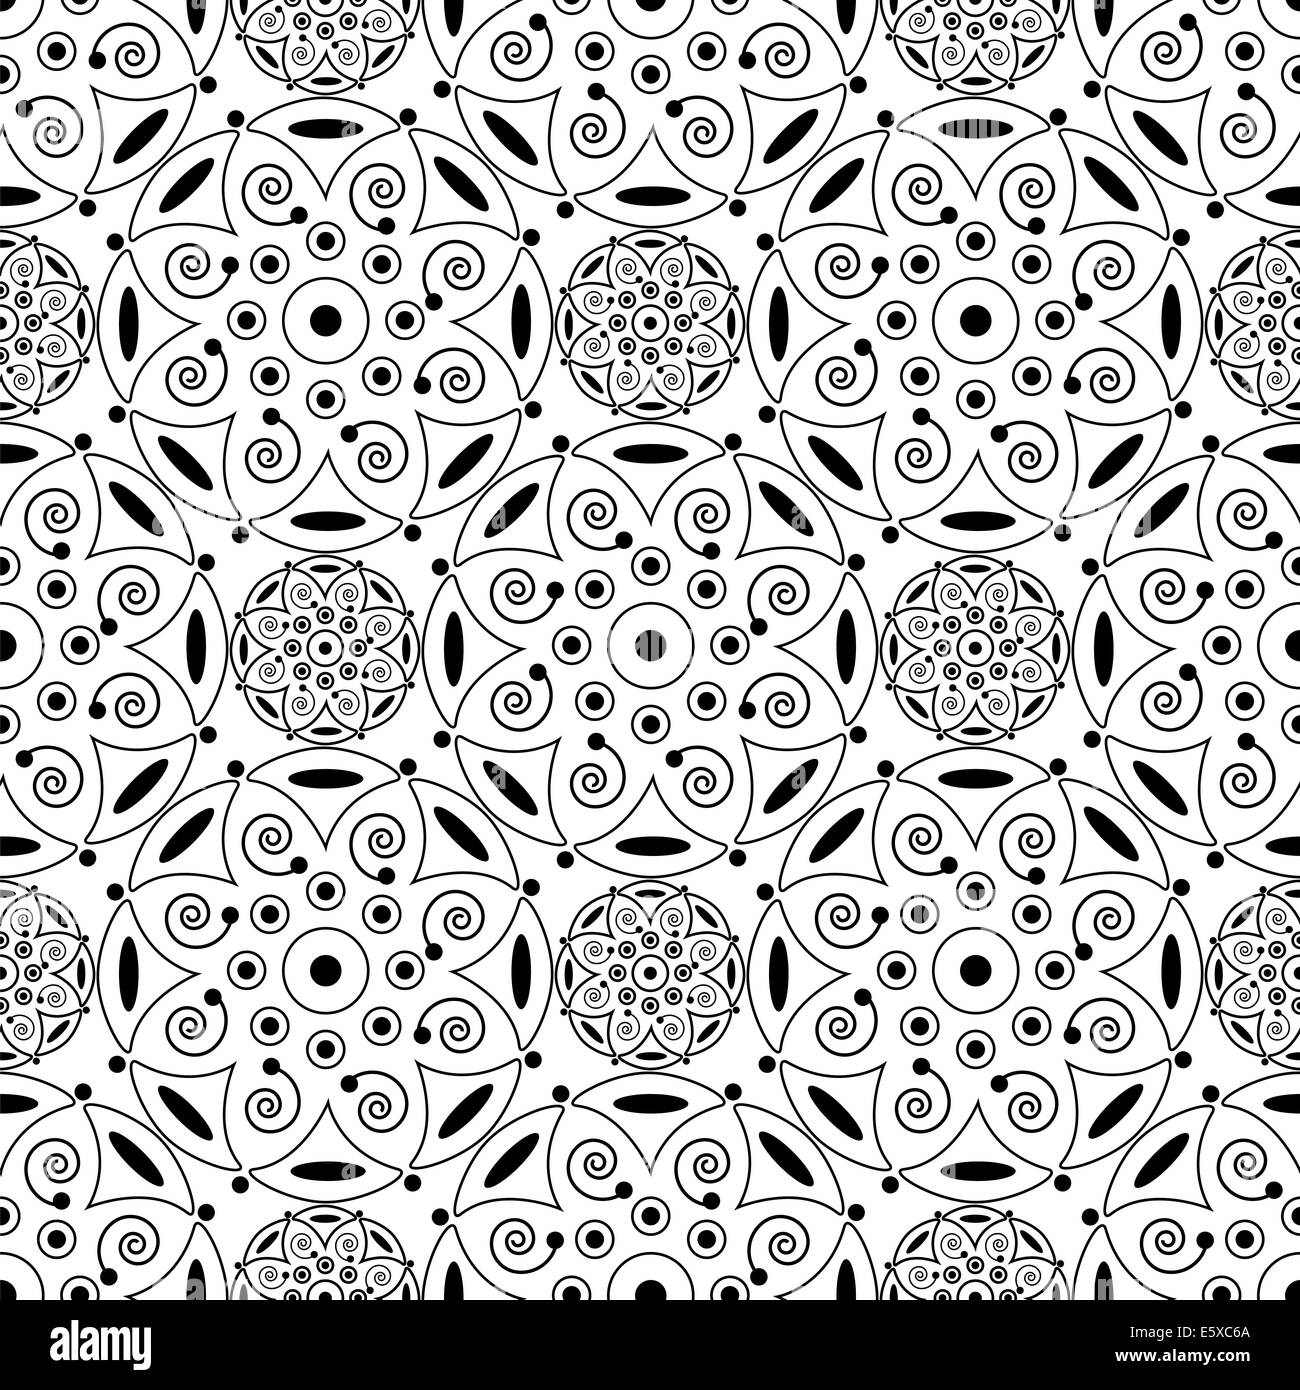 abstract black seamless pattern on white background Stock Photo